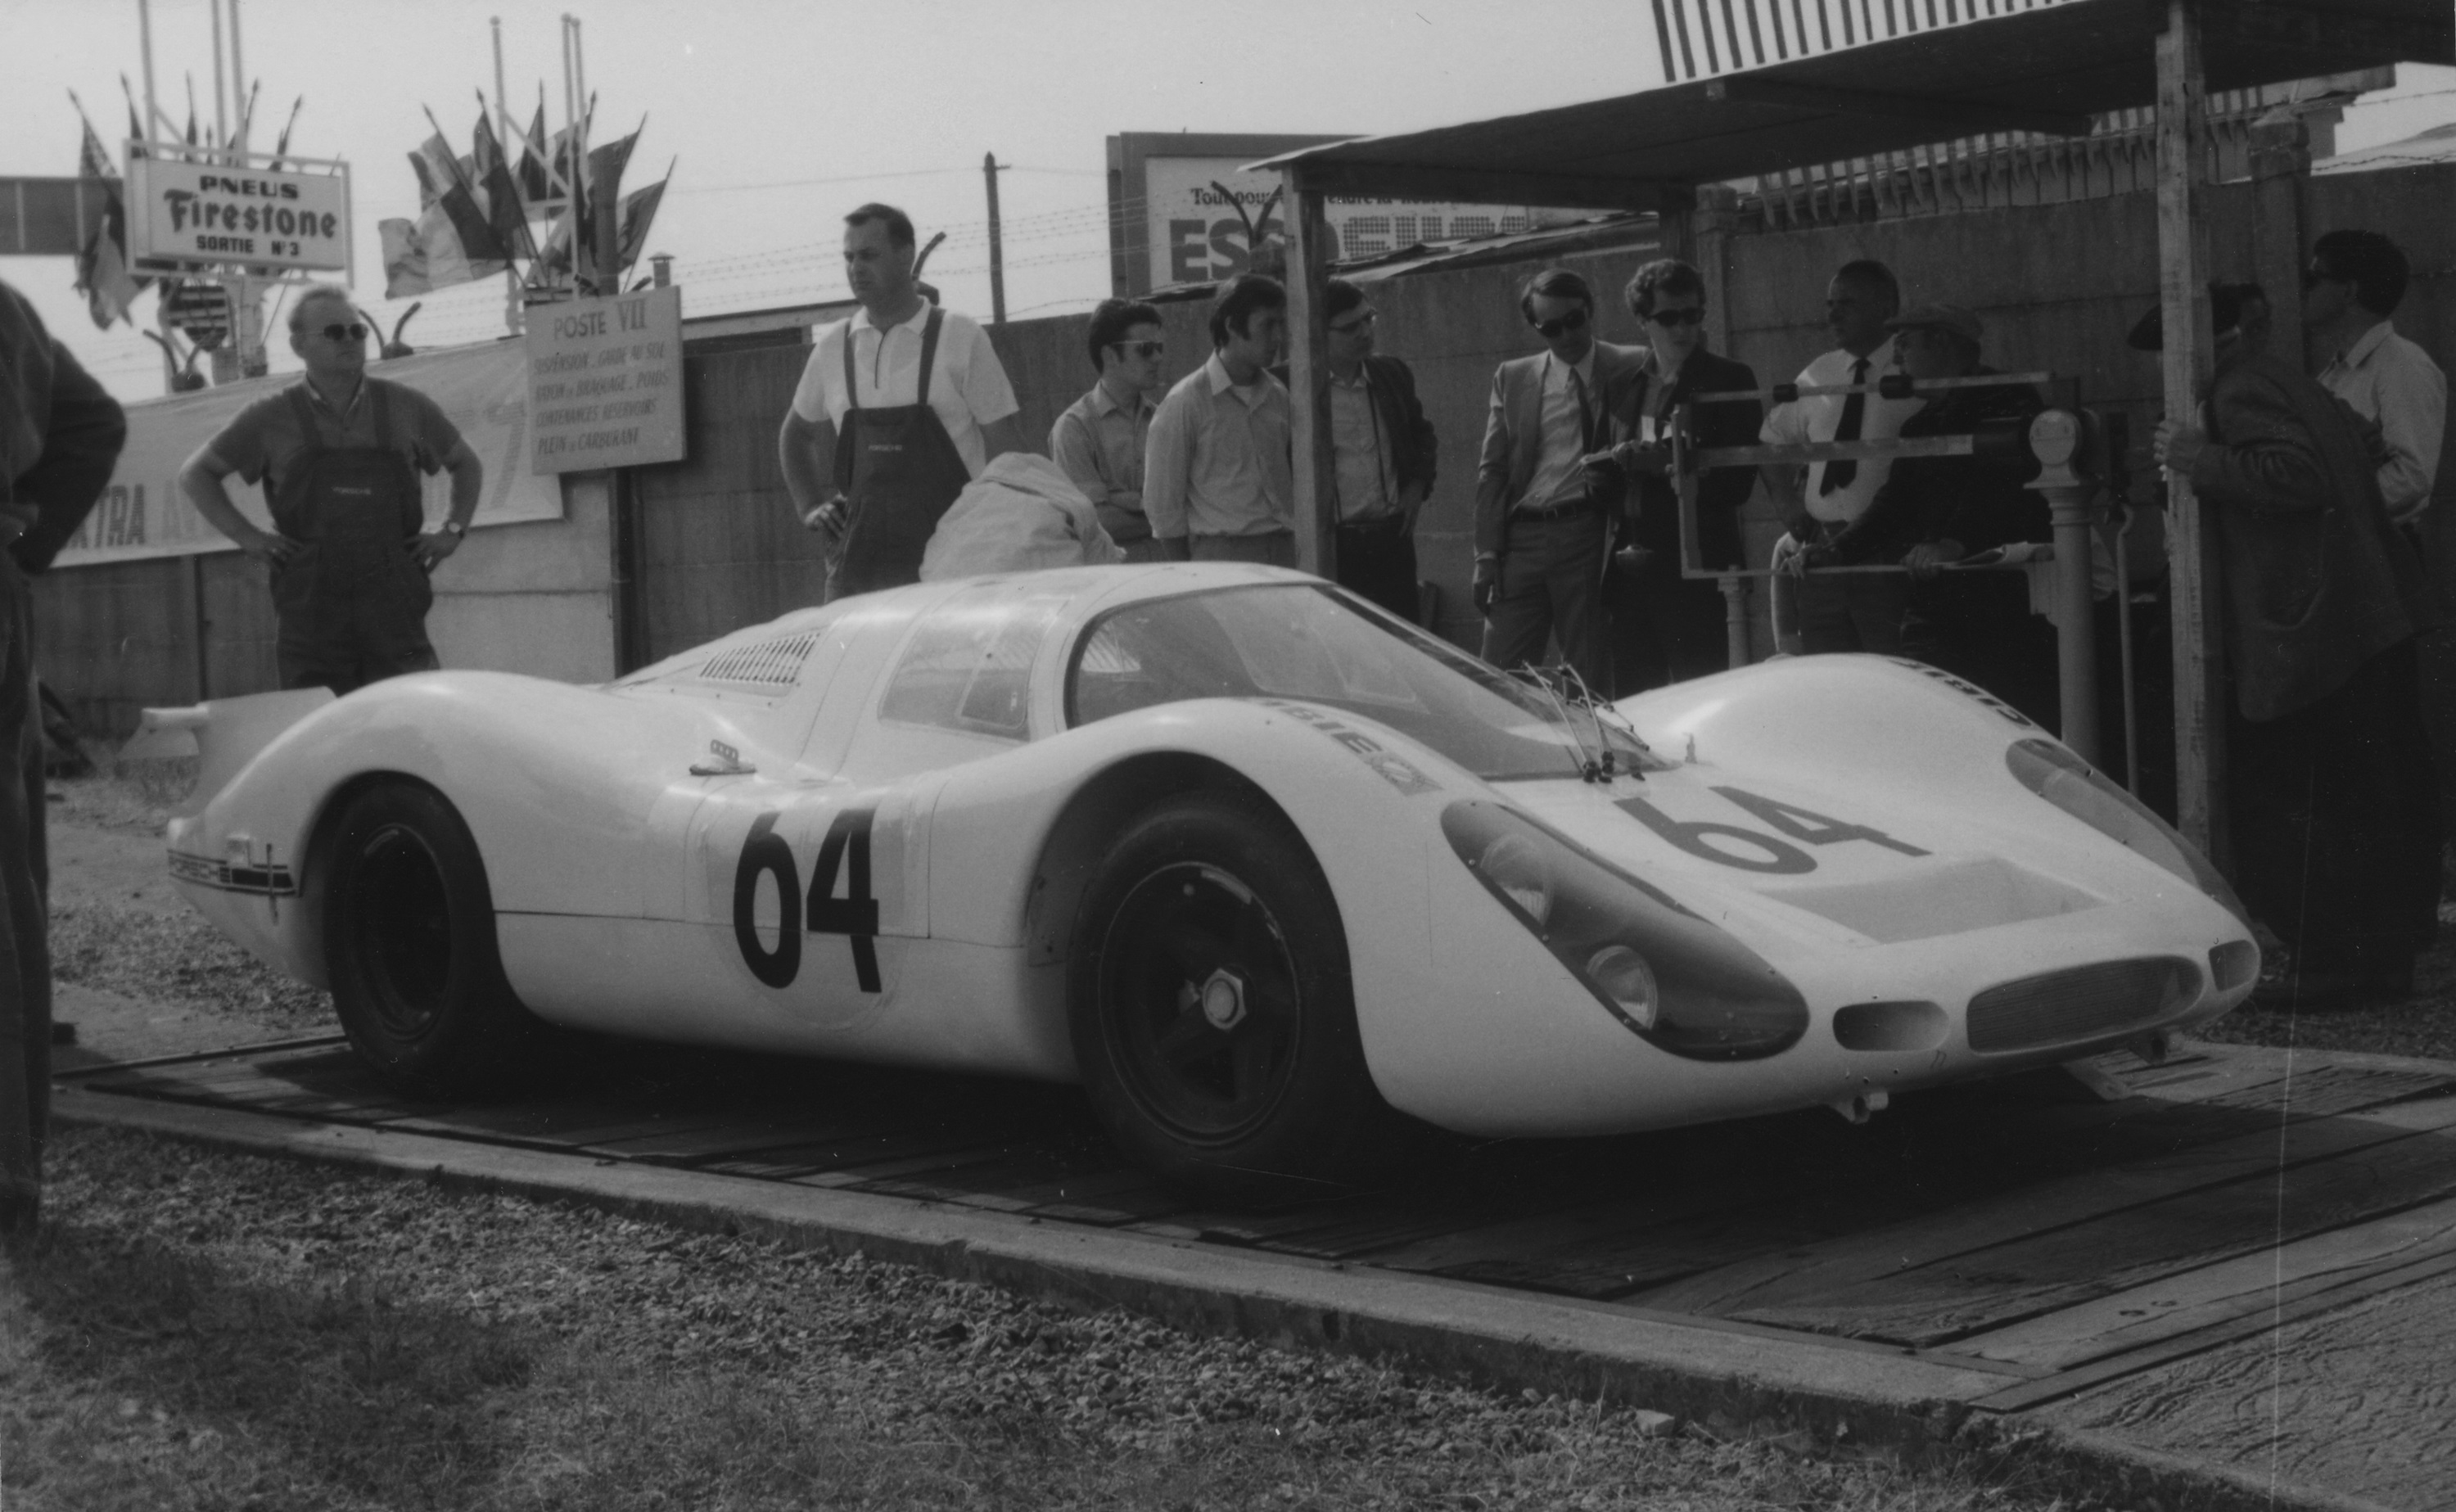 The car was equipped with a flat 8-cylinder engine, compared to 12 for the 917, with a top speed of 275 kph.